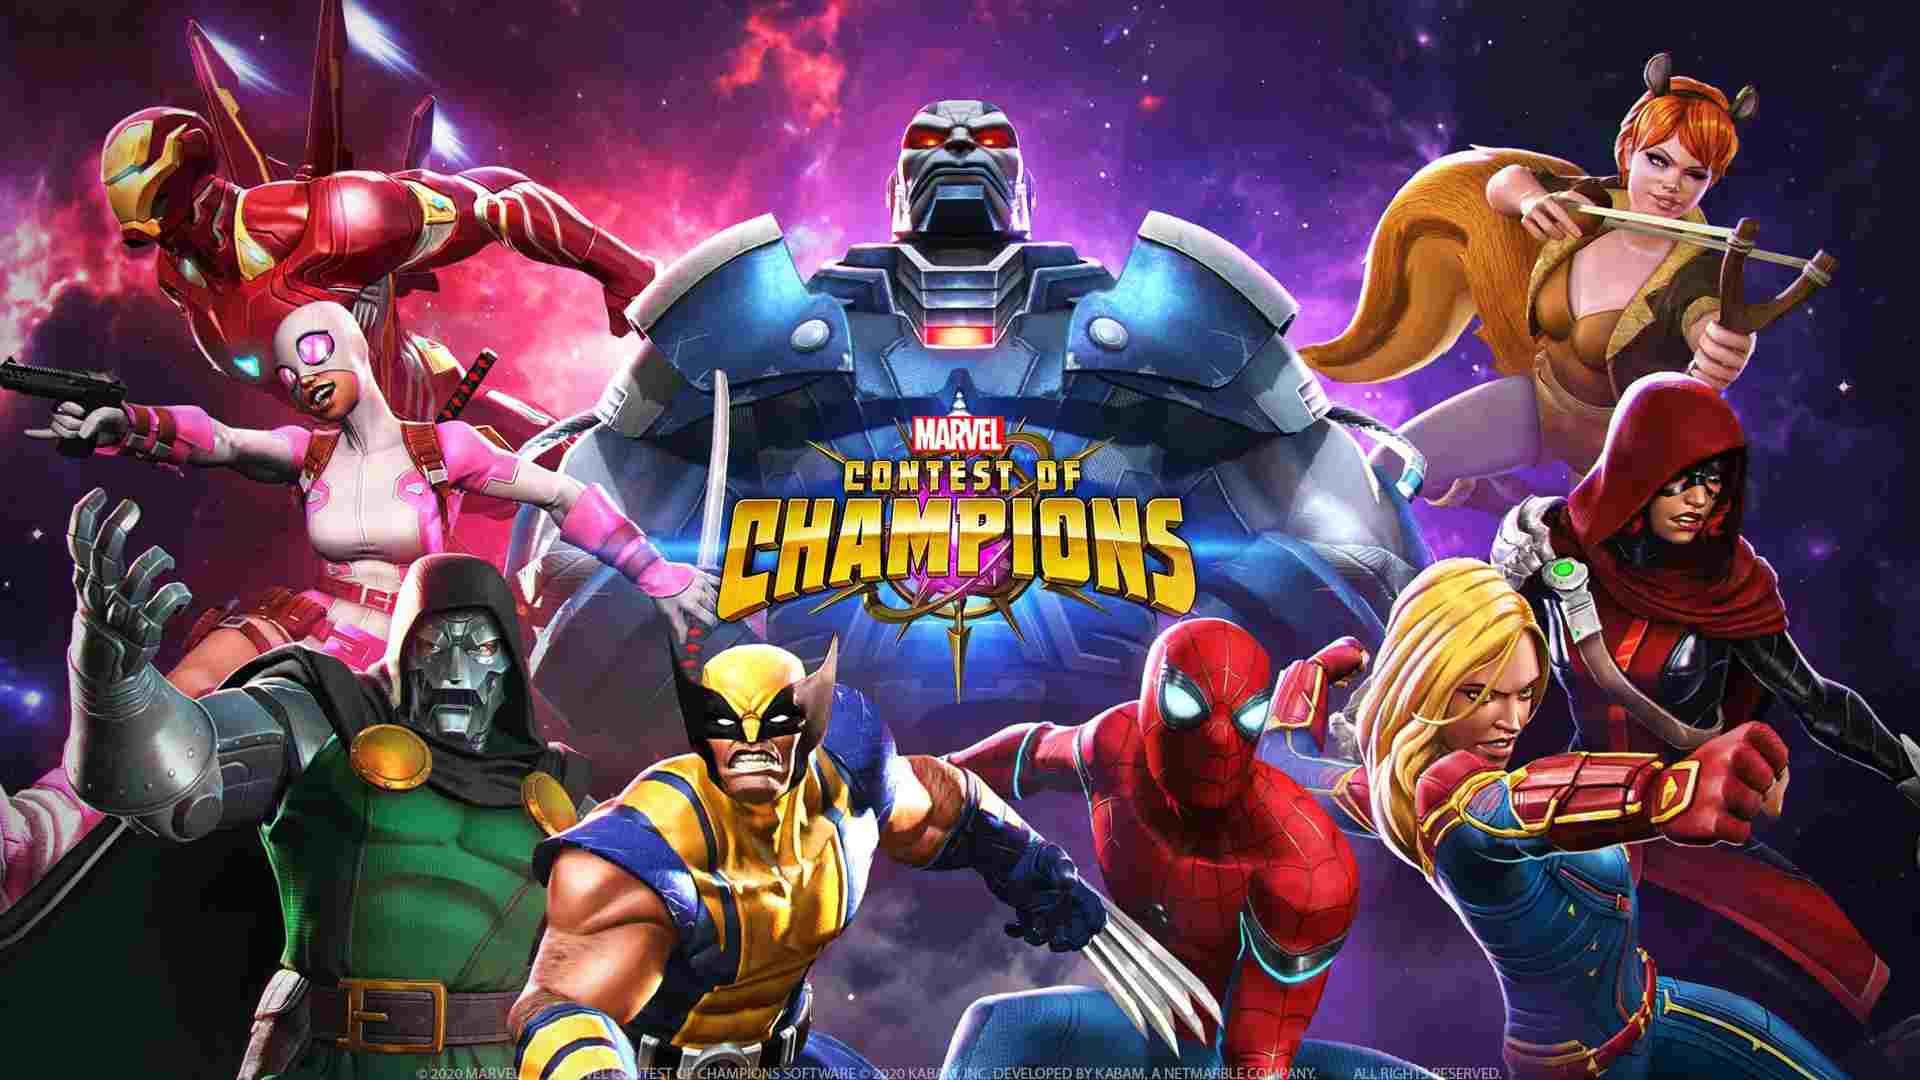 Marvel Contest of Champions 44.0.1 APK MOD Menu LMH, Huge Amount Of Money, crystals, all characters unlocked, dmg